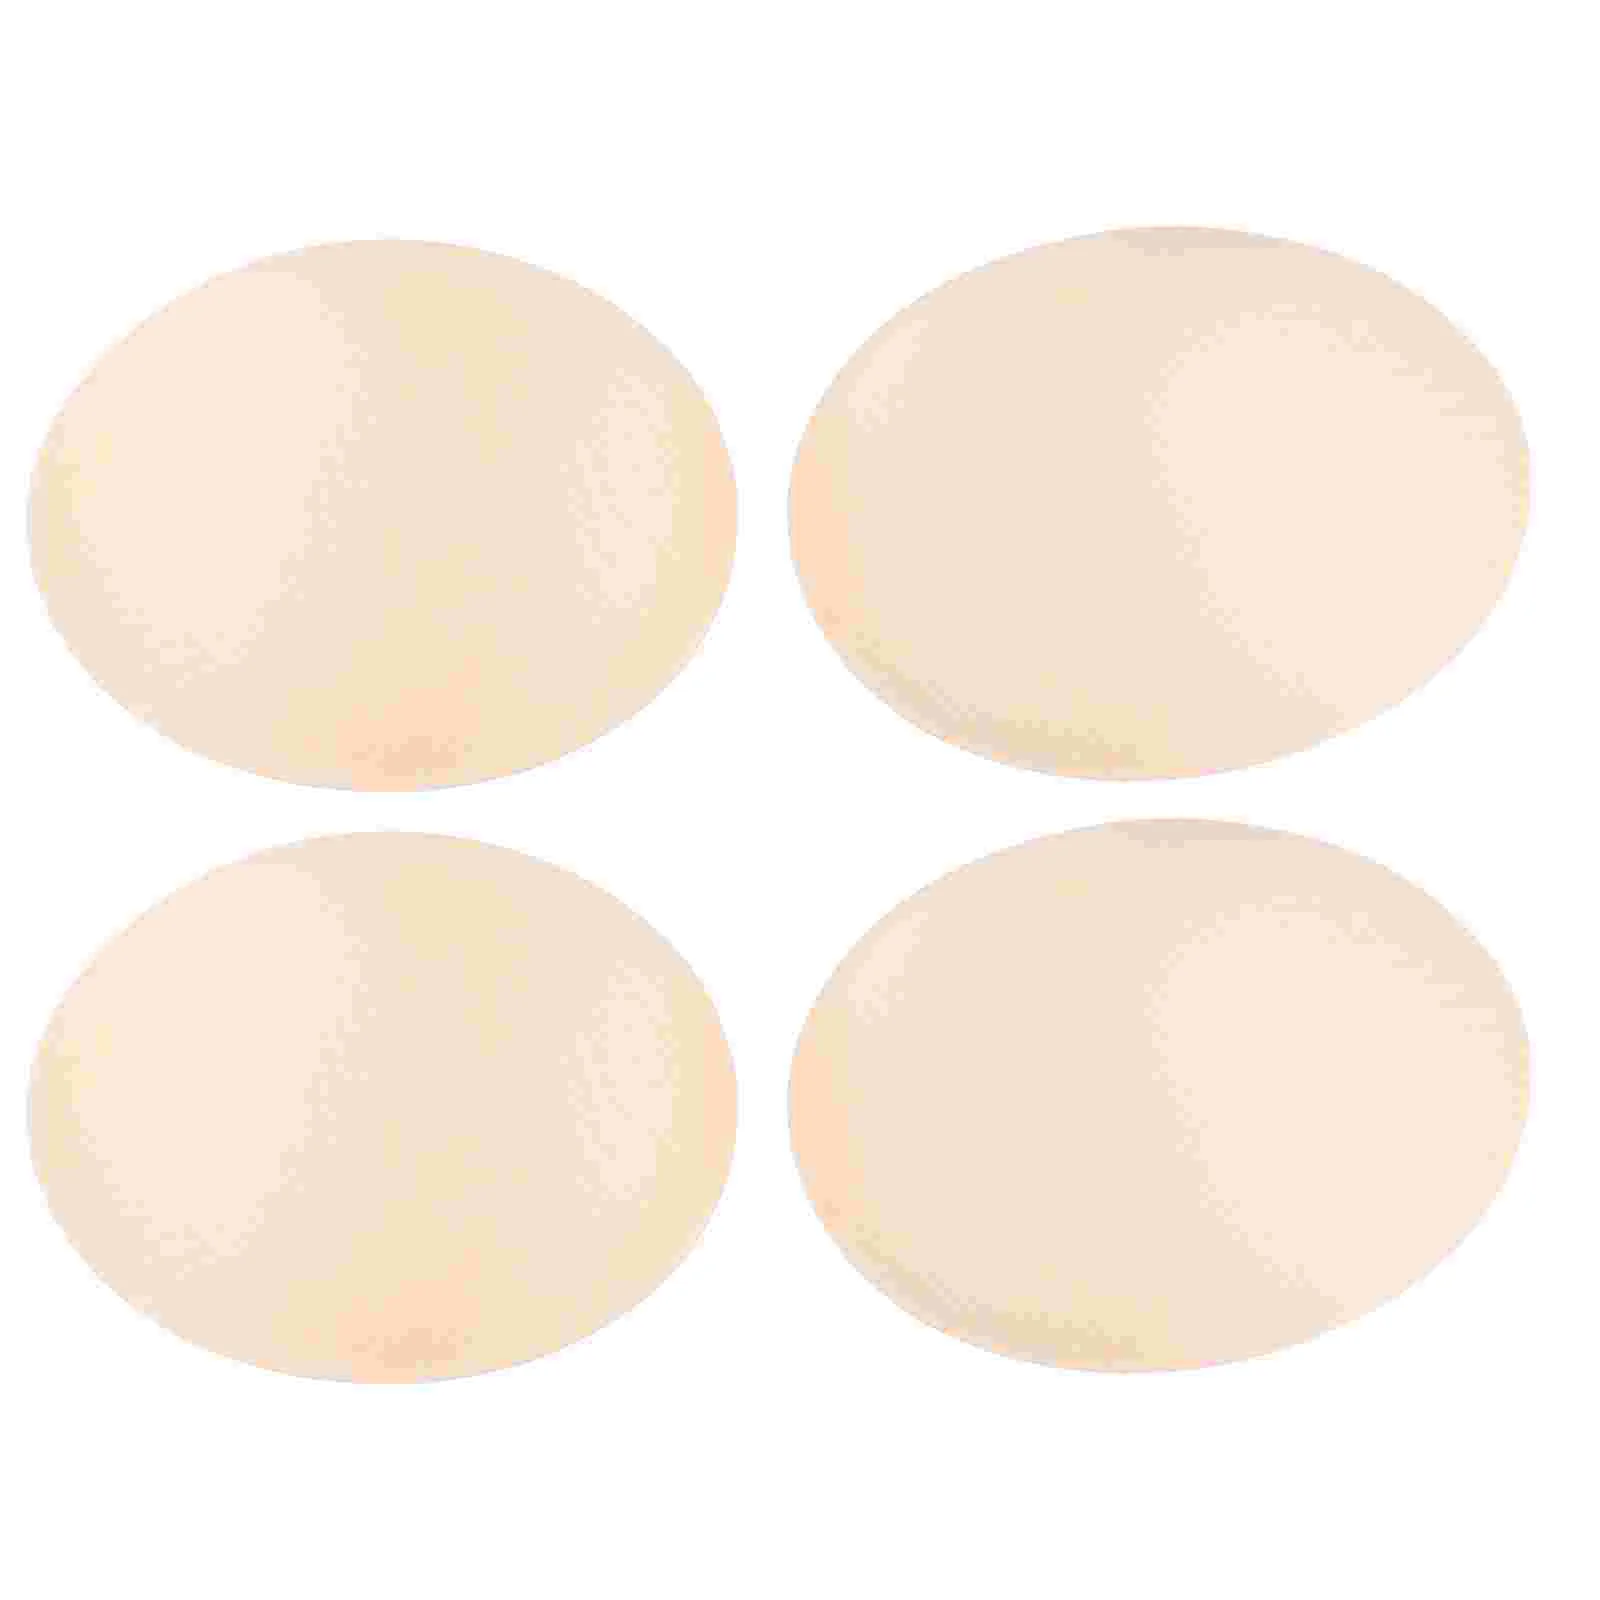 

2 Pairs Breast Pad Inserts Push Bandeau Sports Sponge Padding Vest Liners Women Intimates Accessories Miss Clothes Covers